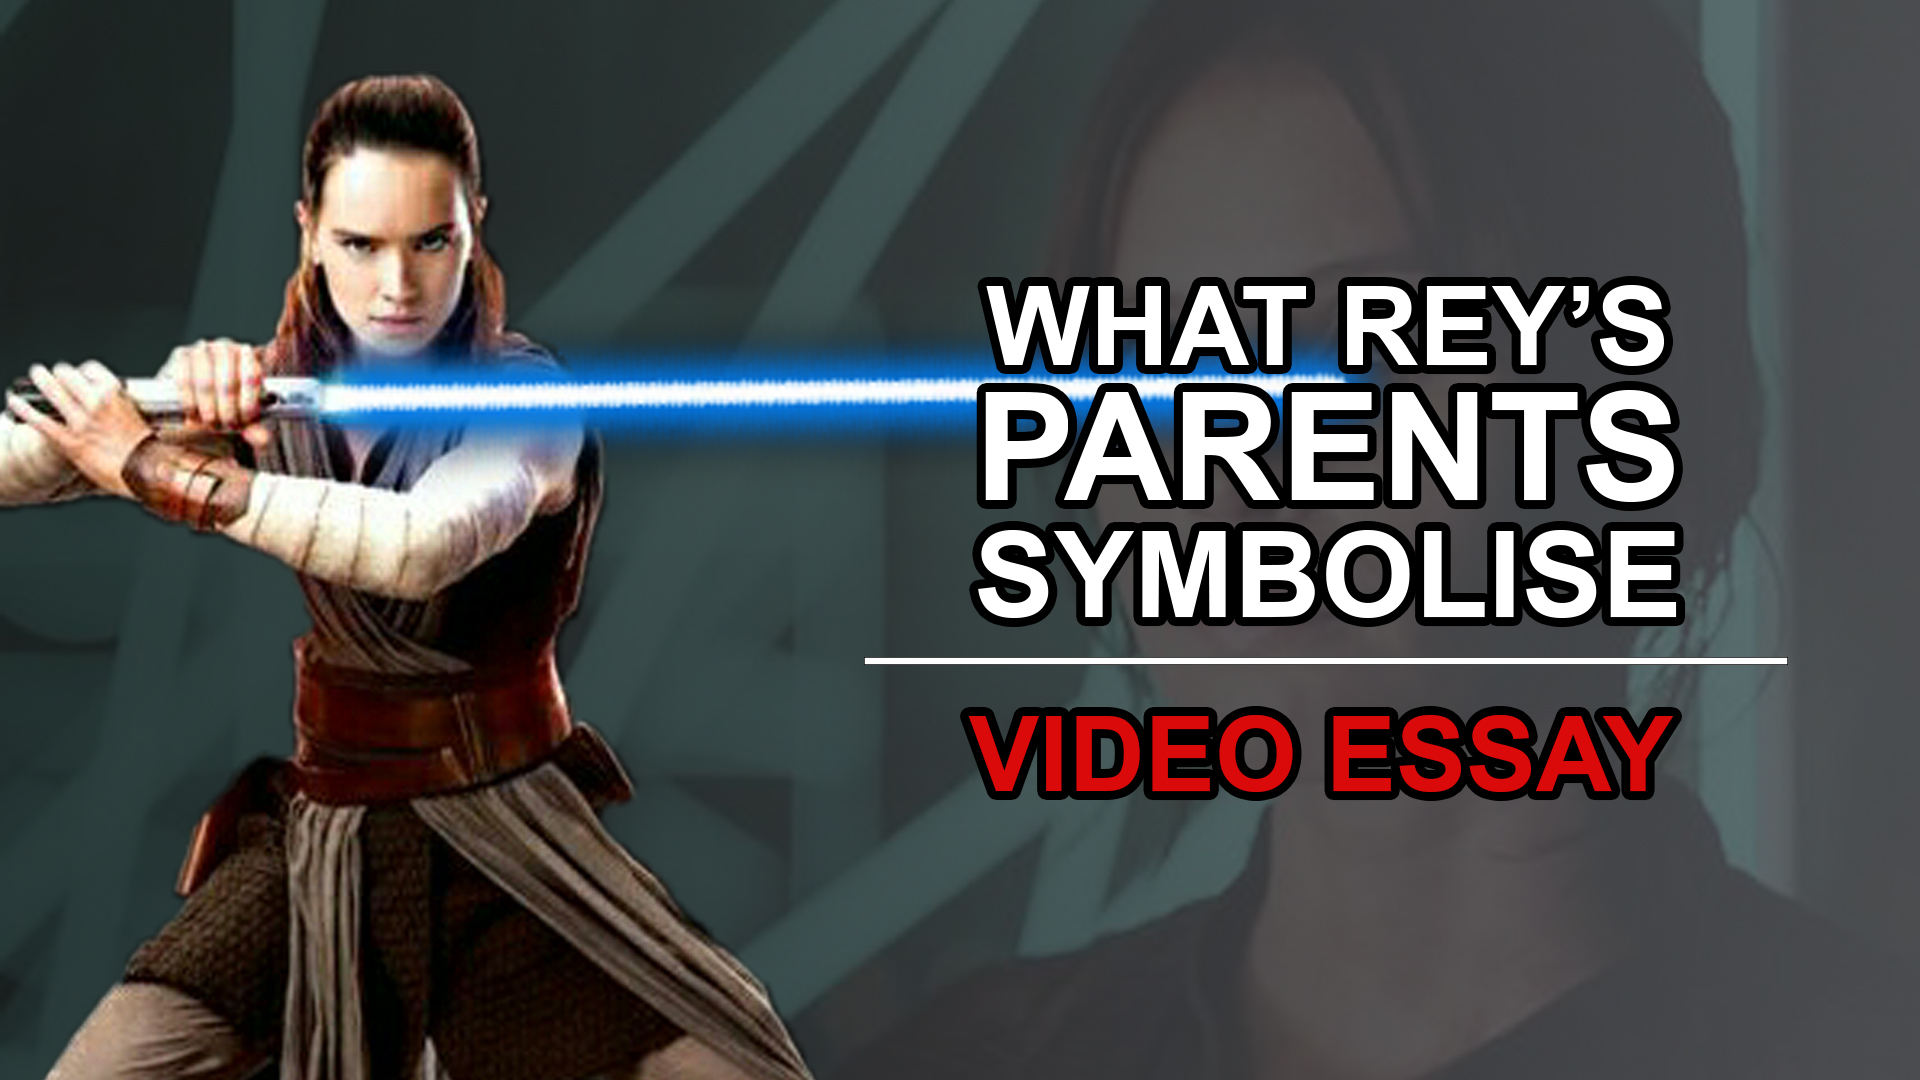 Star Wars The Last Jedi Reys True Parents Identity and Fan Theory explained and what this symbolises